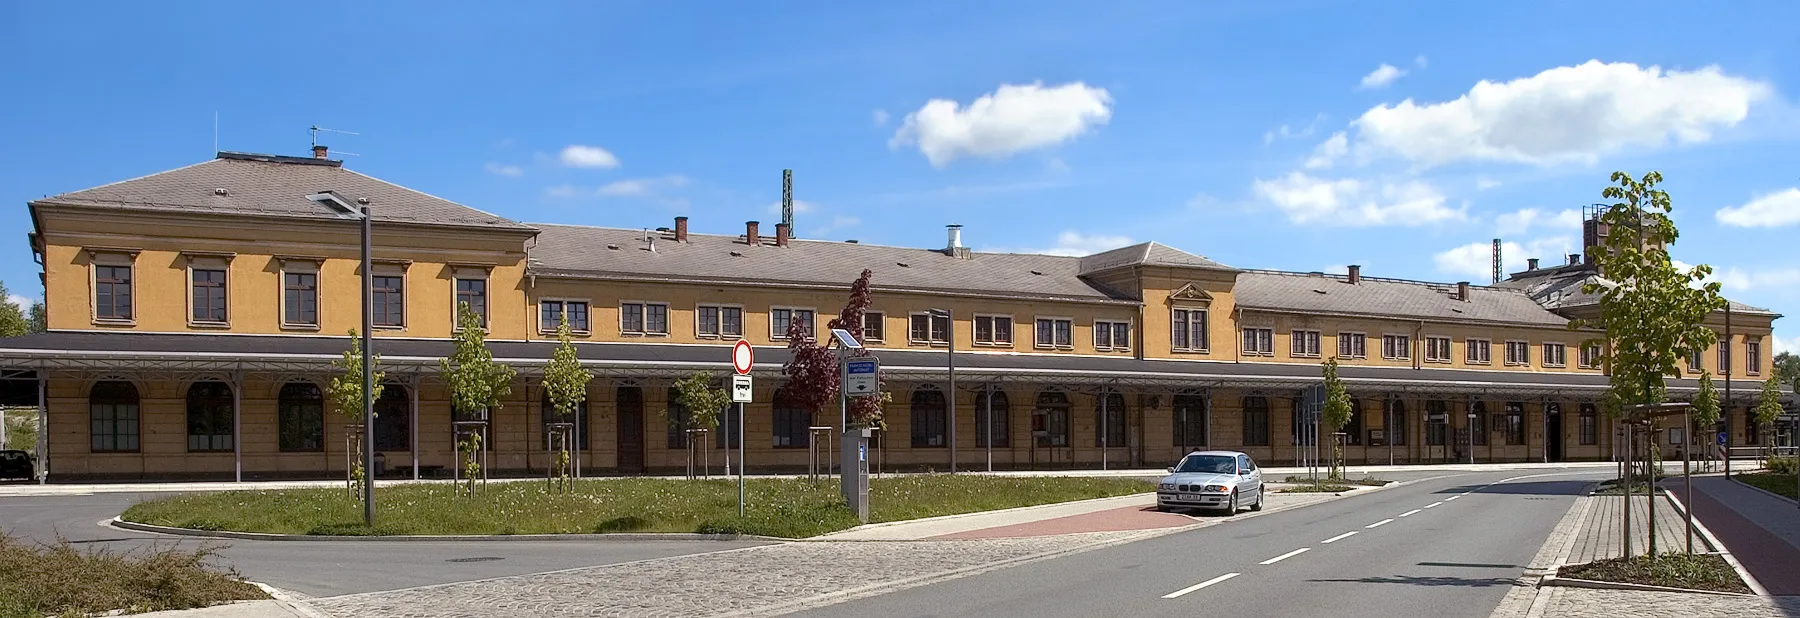 Photo showing: This image shows the railway station in Reichenbach (Saxony, Germany).